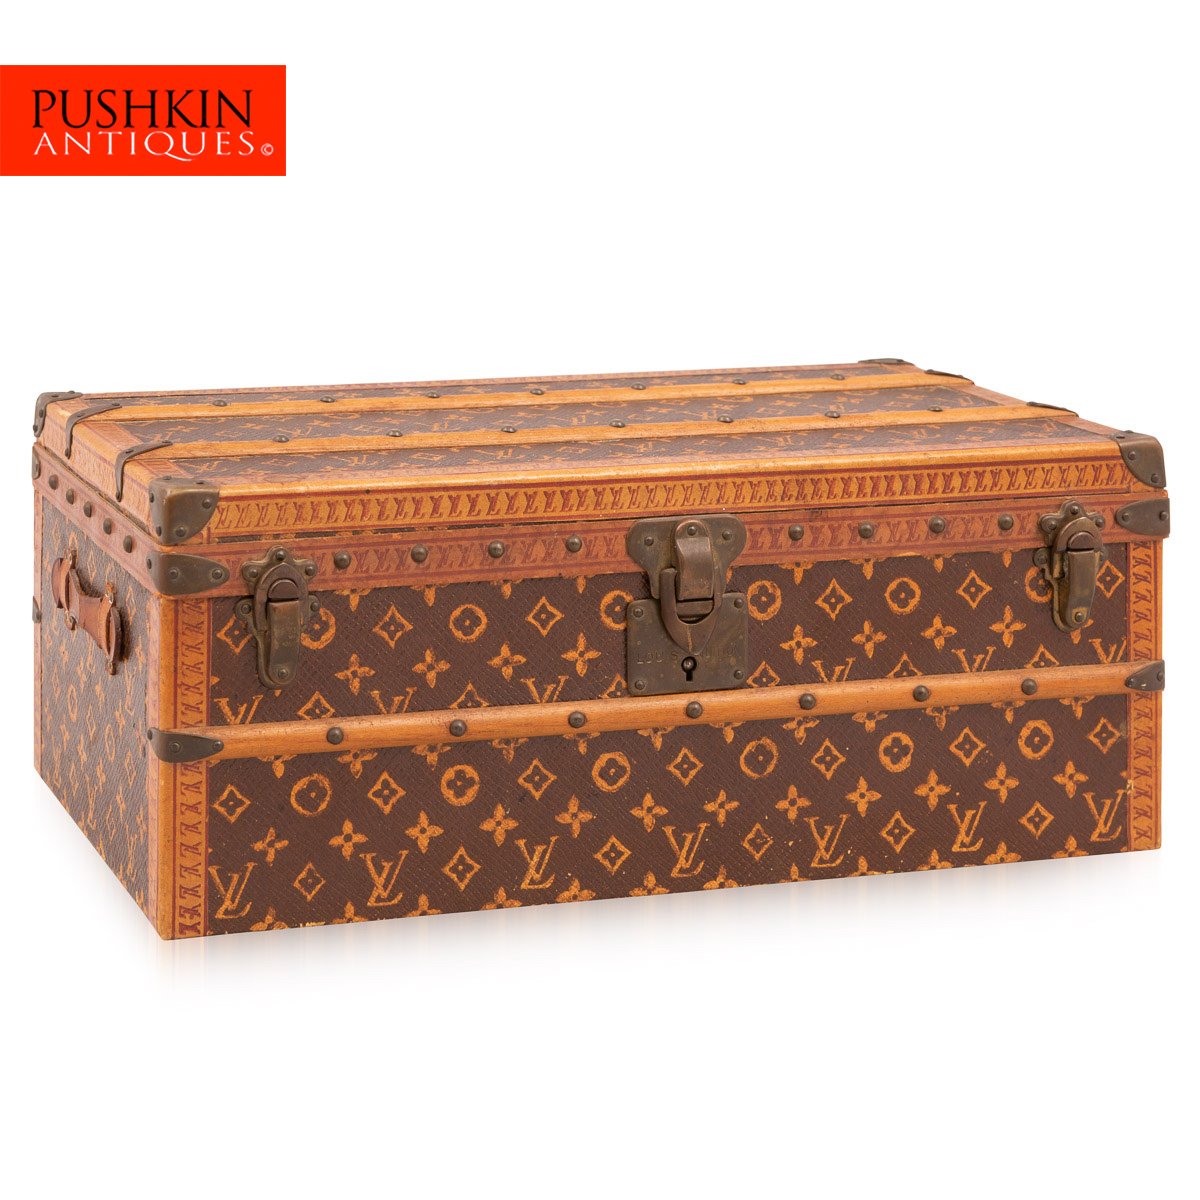 Rare by Oulton - The Louis Vuitton Flower Trunks were created in the early  1910's - 1920's to reward VIP clients. They were offered to clients only in  Paris at first as